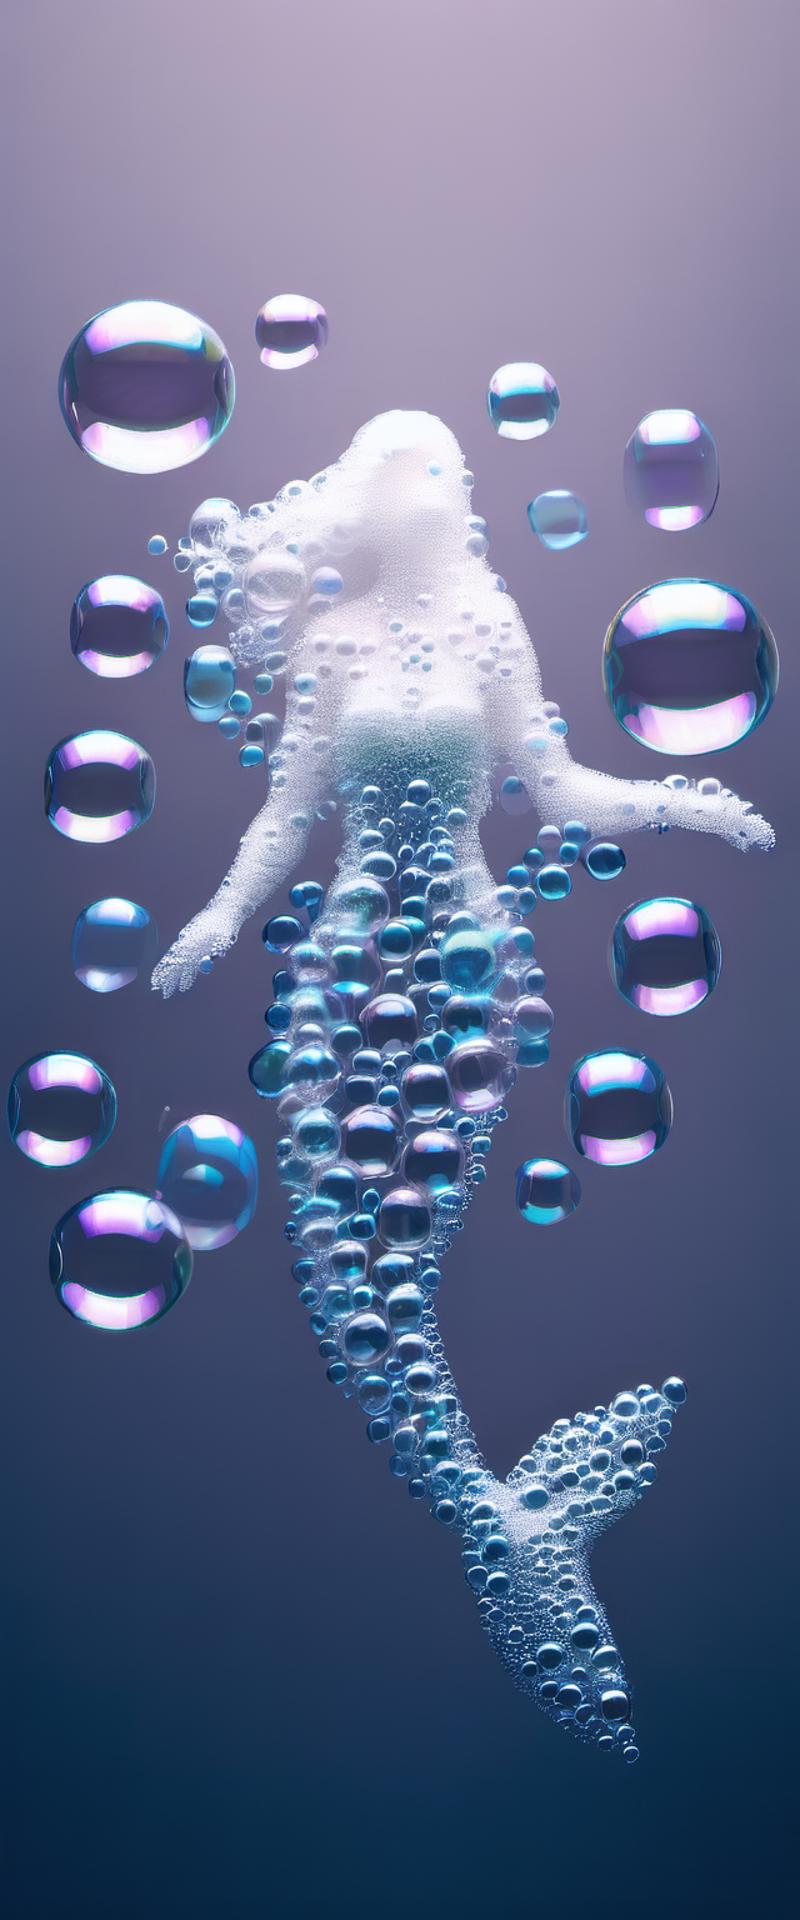 Woman in a blue dress surrounded by bubbles and reflections.